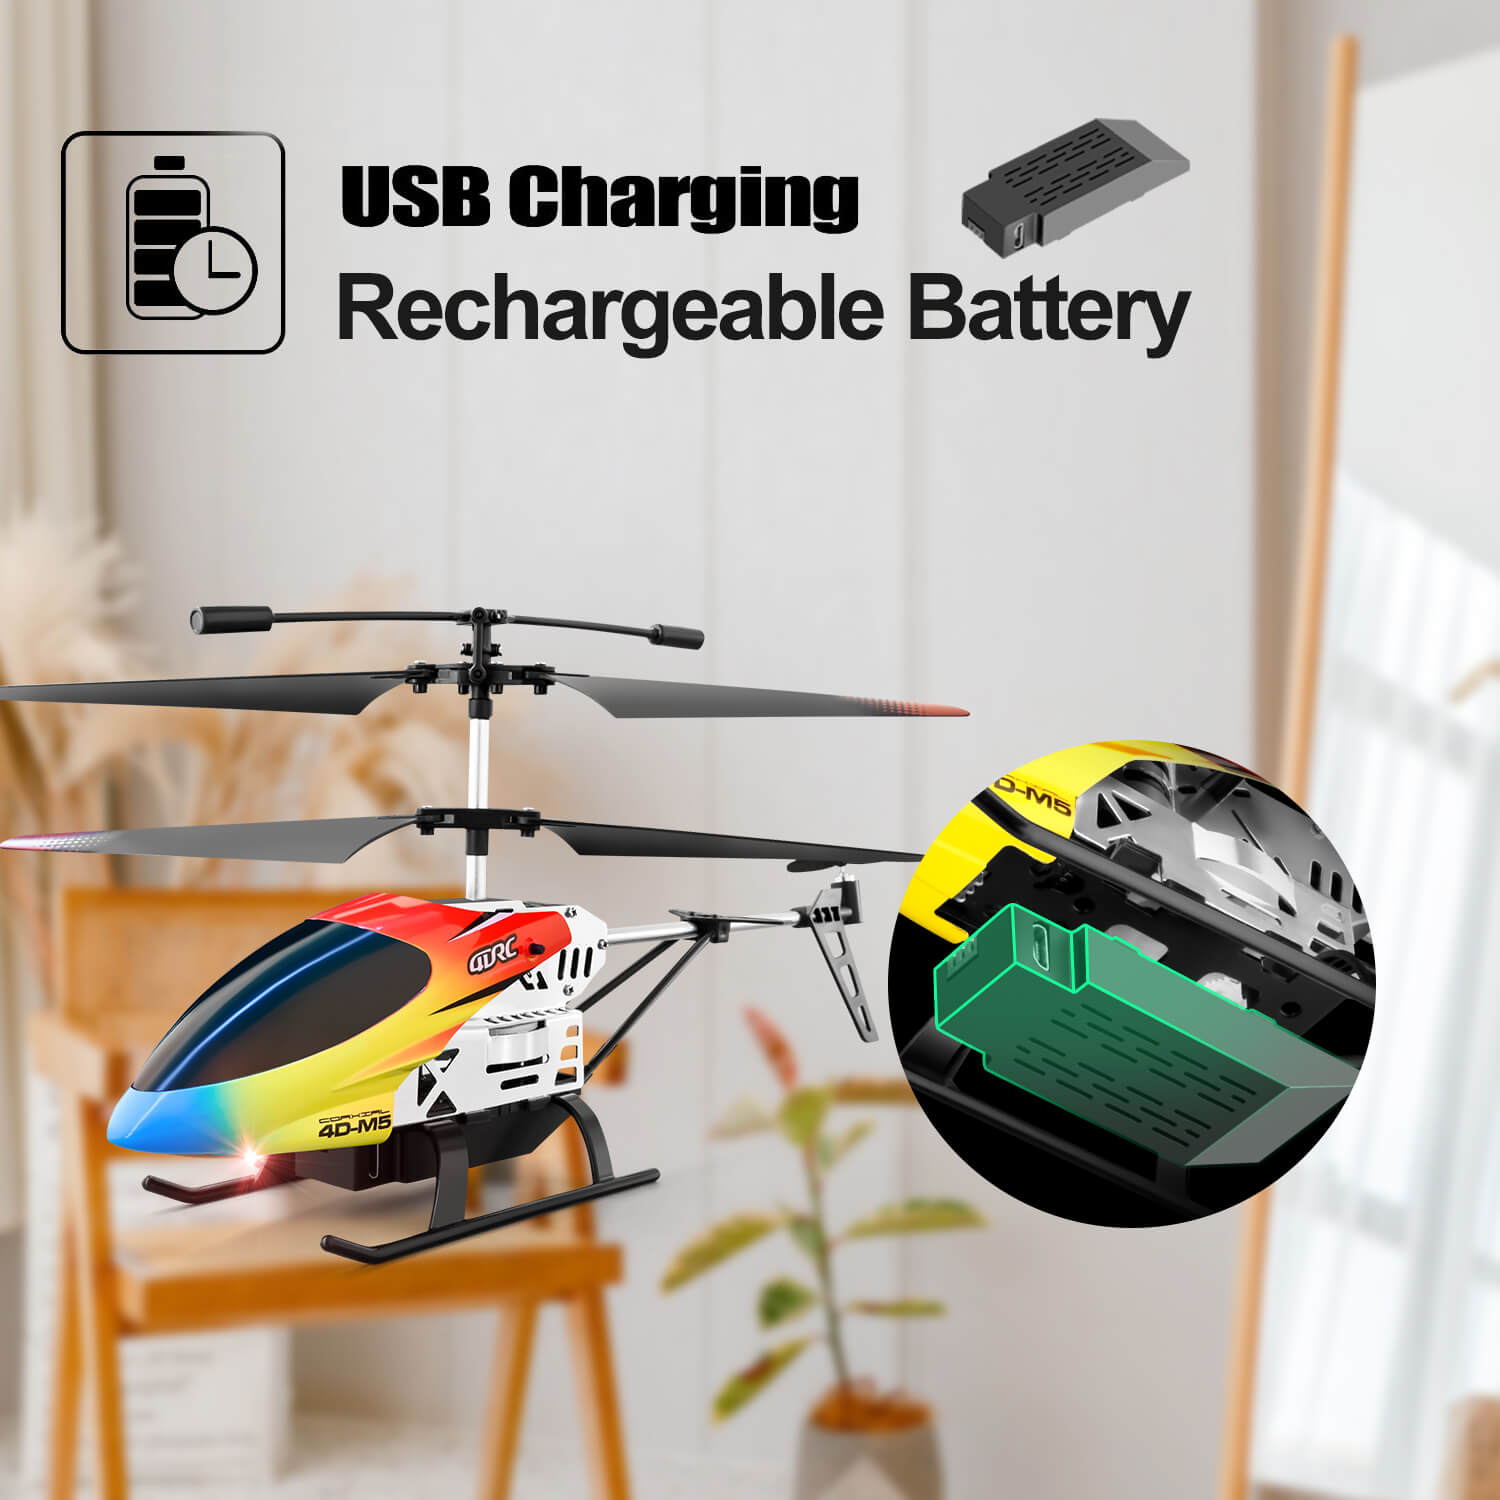 4D-M5 Remote Control Helicopter – 4DRC